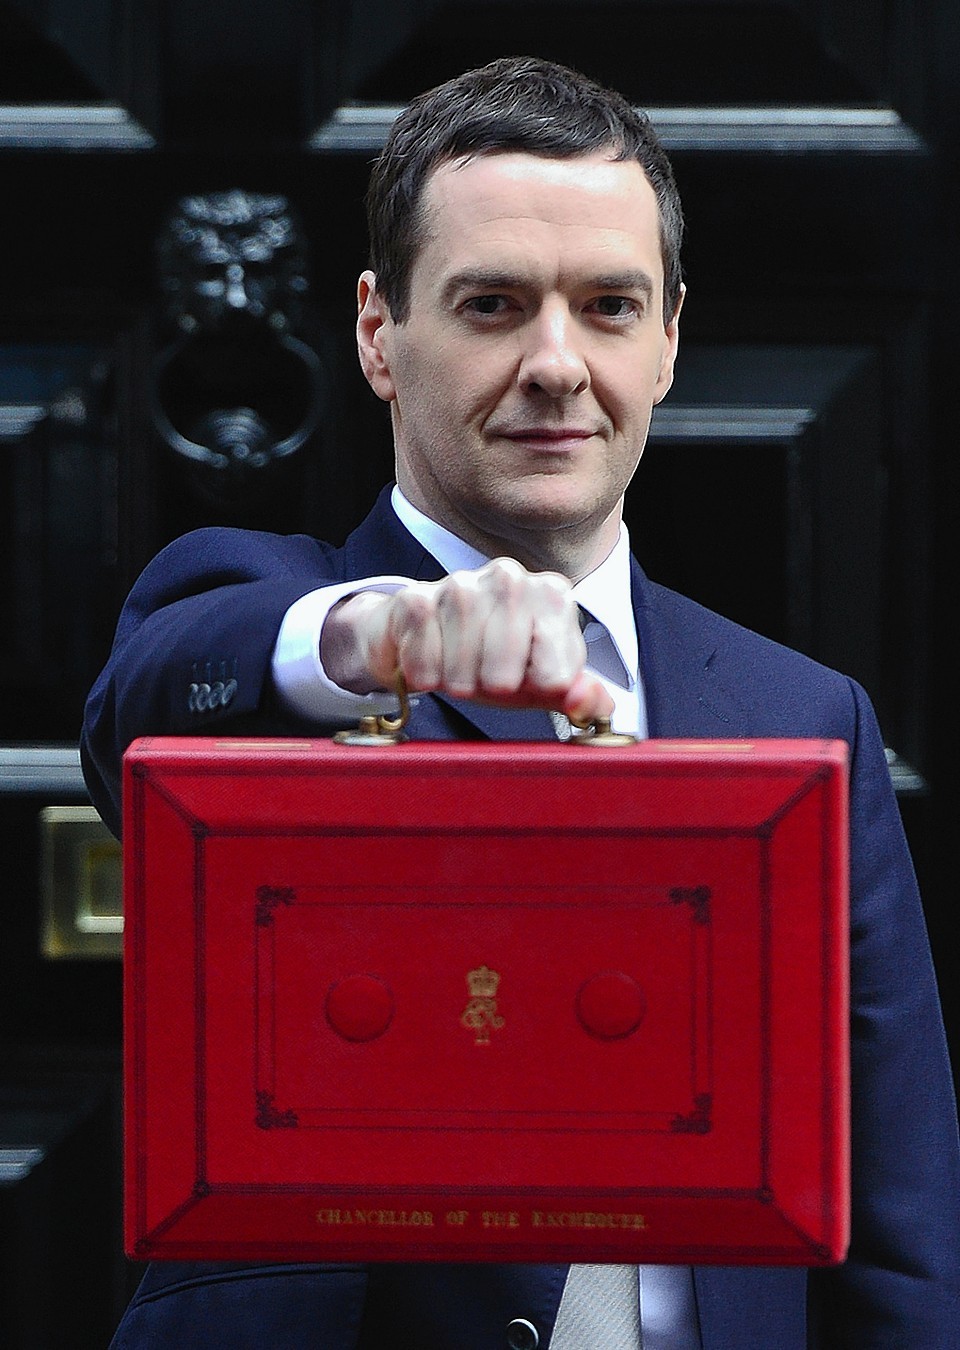 The chancellor on Downing Street earlier today